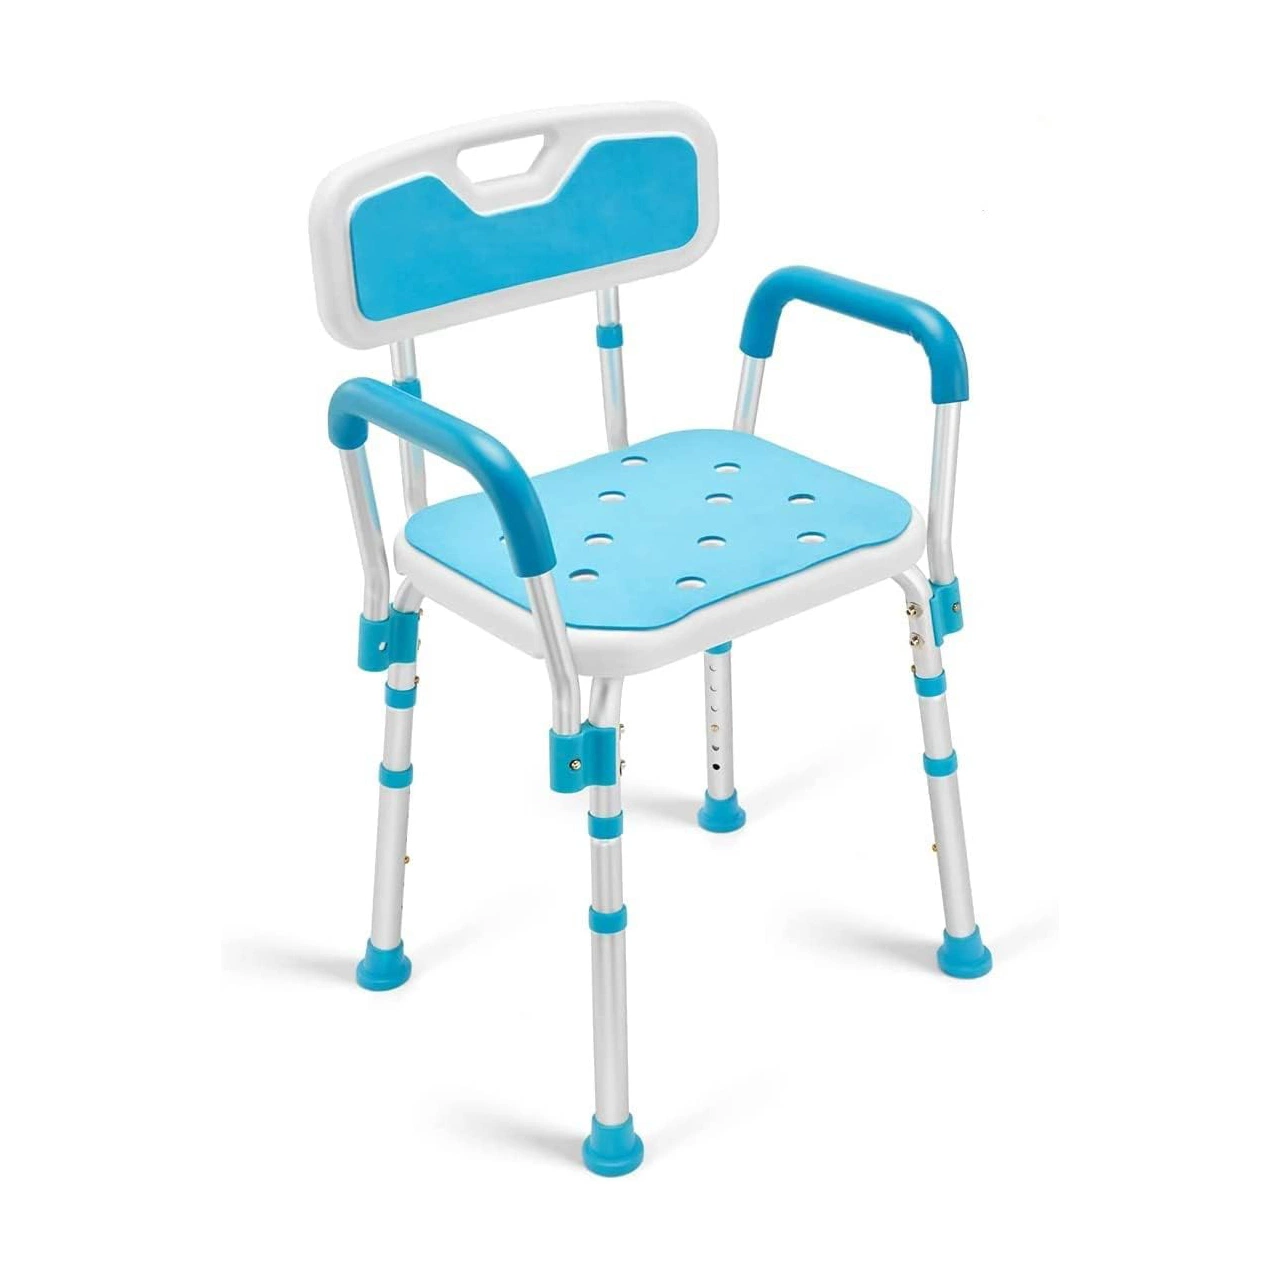 Bliss Medical Adjustable Shower Chair Bathtub Seat with Back Removable Arms for Handicap Disabled Elderly